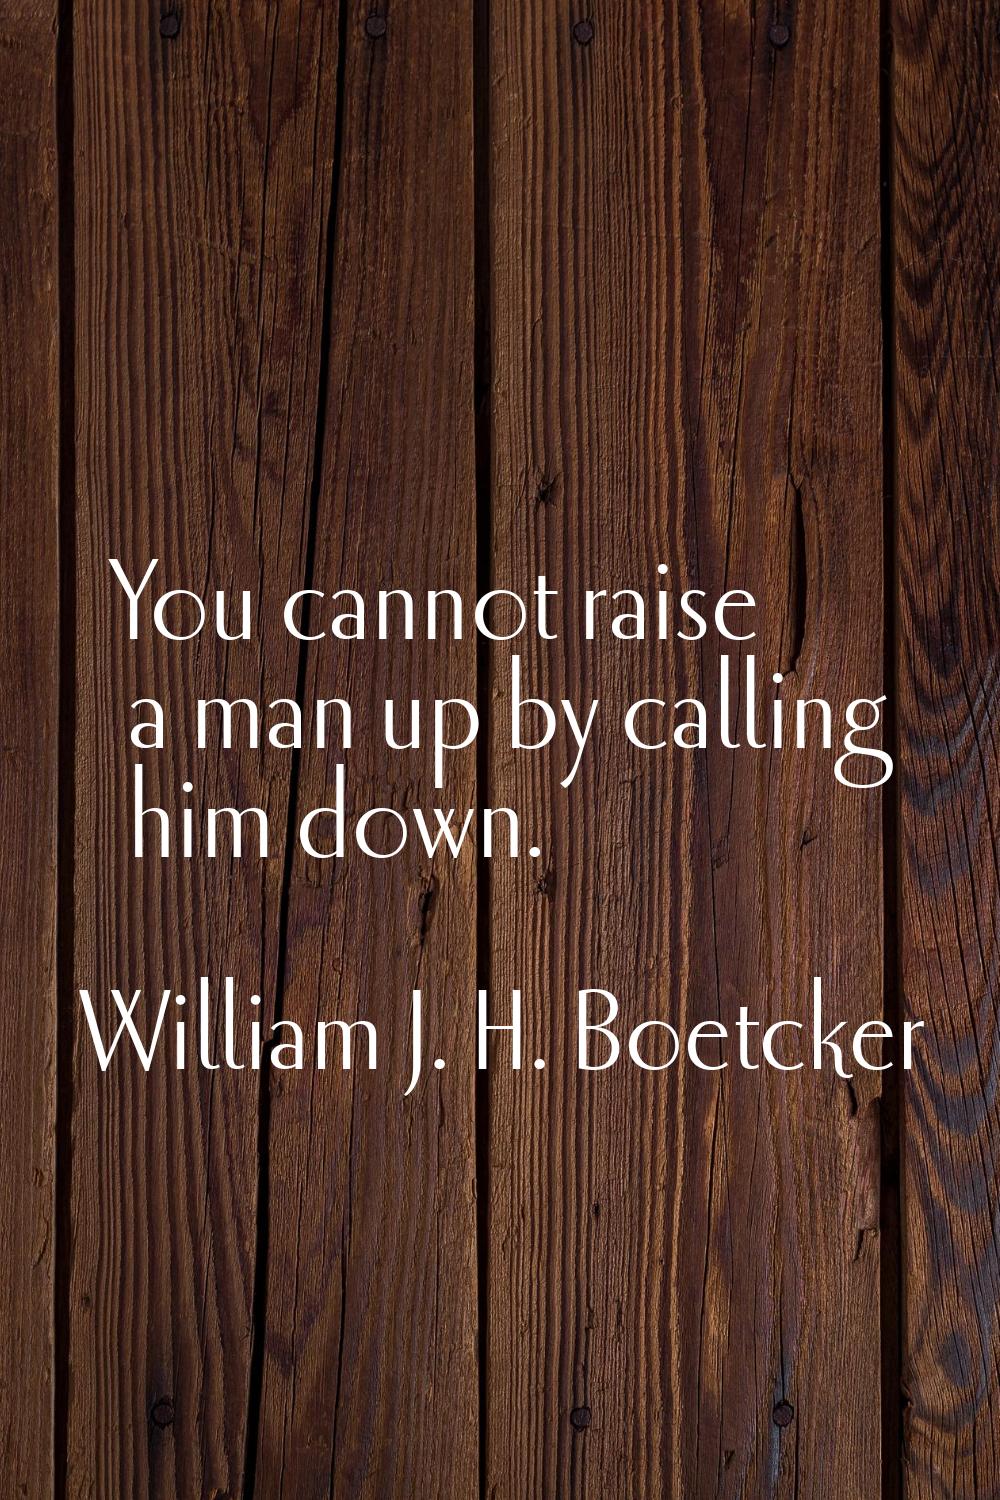 You cannot raise a man up by calling him down.